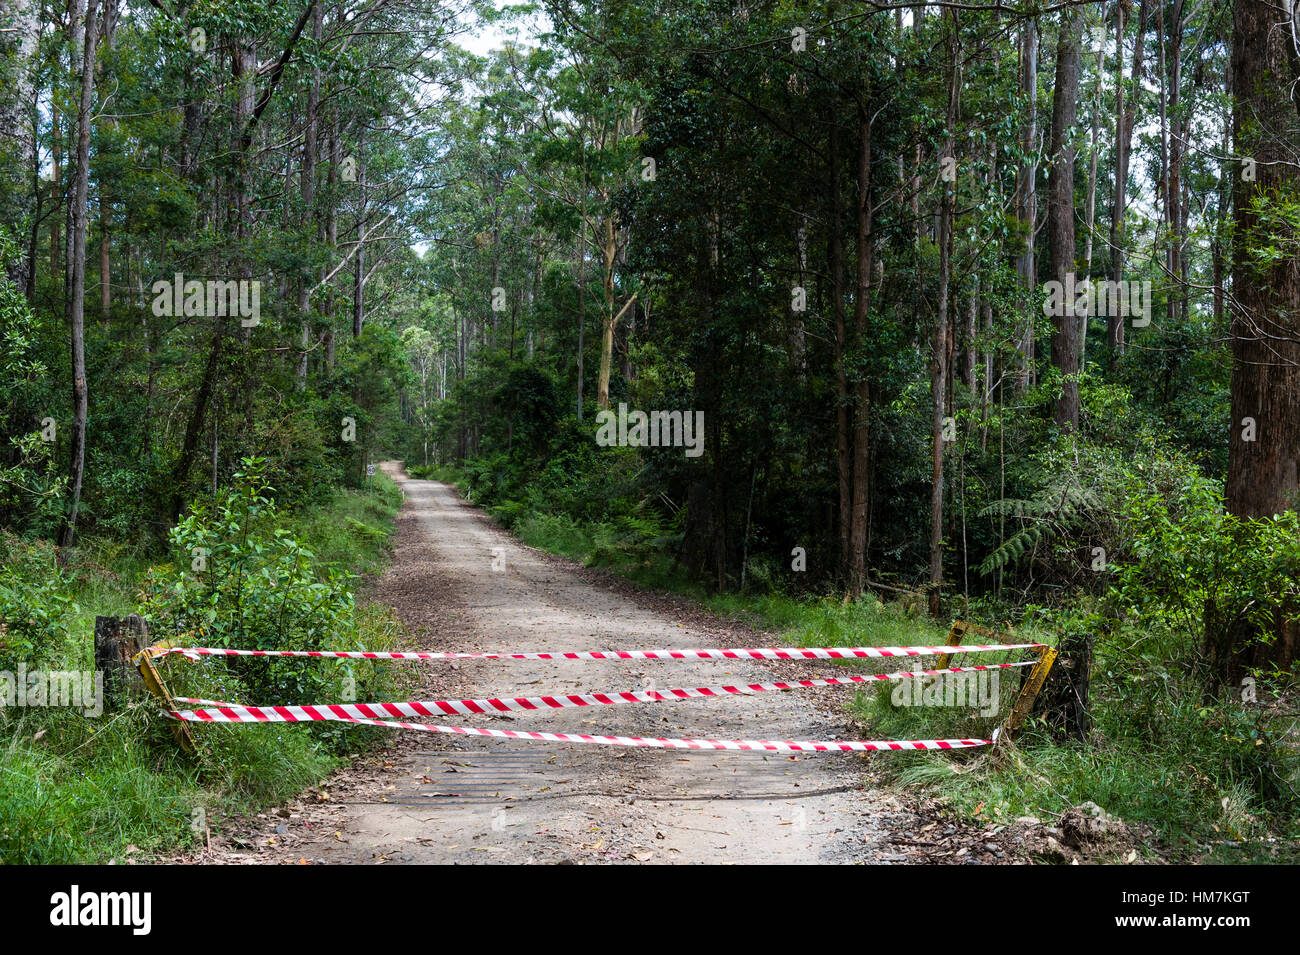 Emergency services tape across a forest track during bushfires. Stock Photo